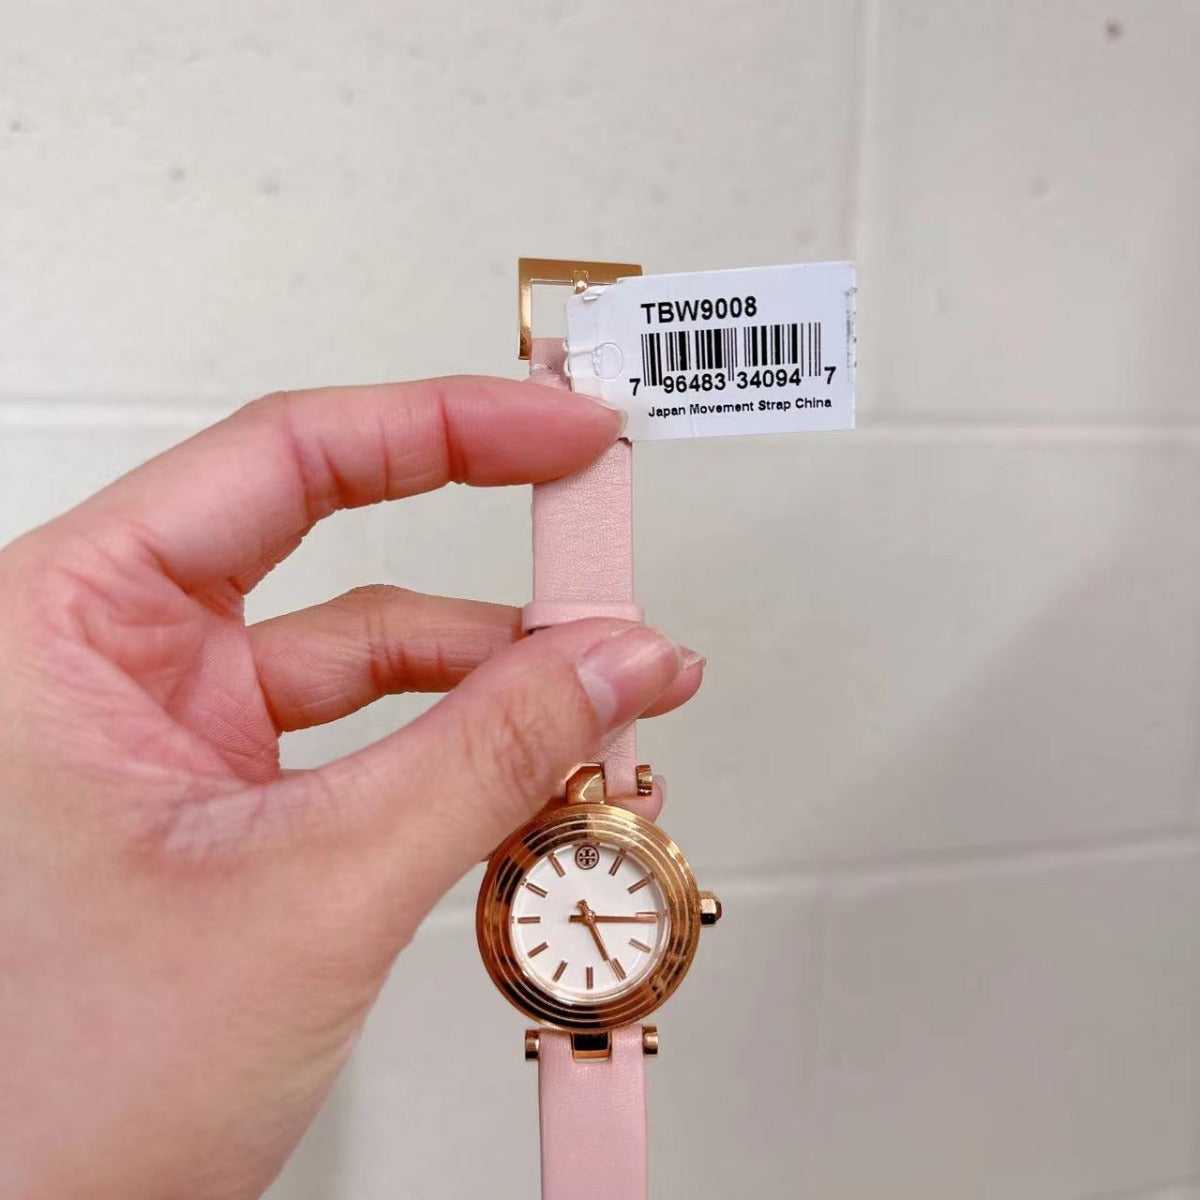 TORY BURCH TBW9008 CLASSIC T ROSE GOLD PINK LEATHER WOMEN'S WATCH